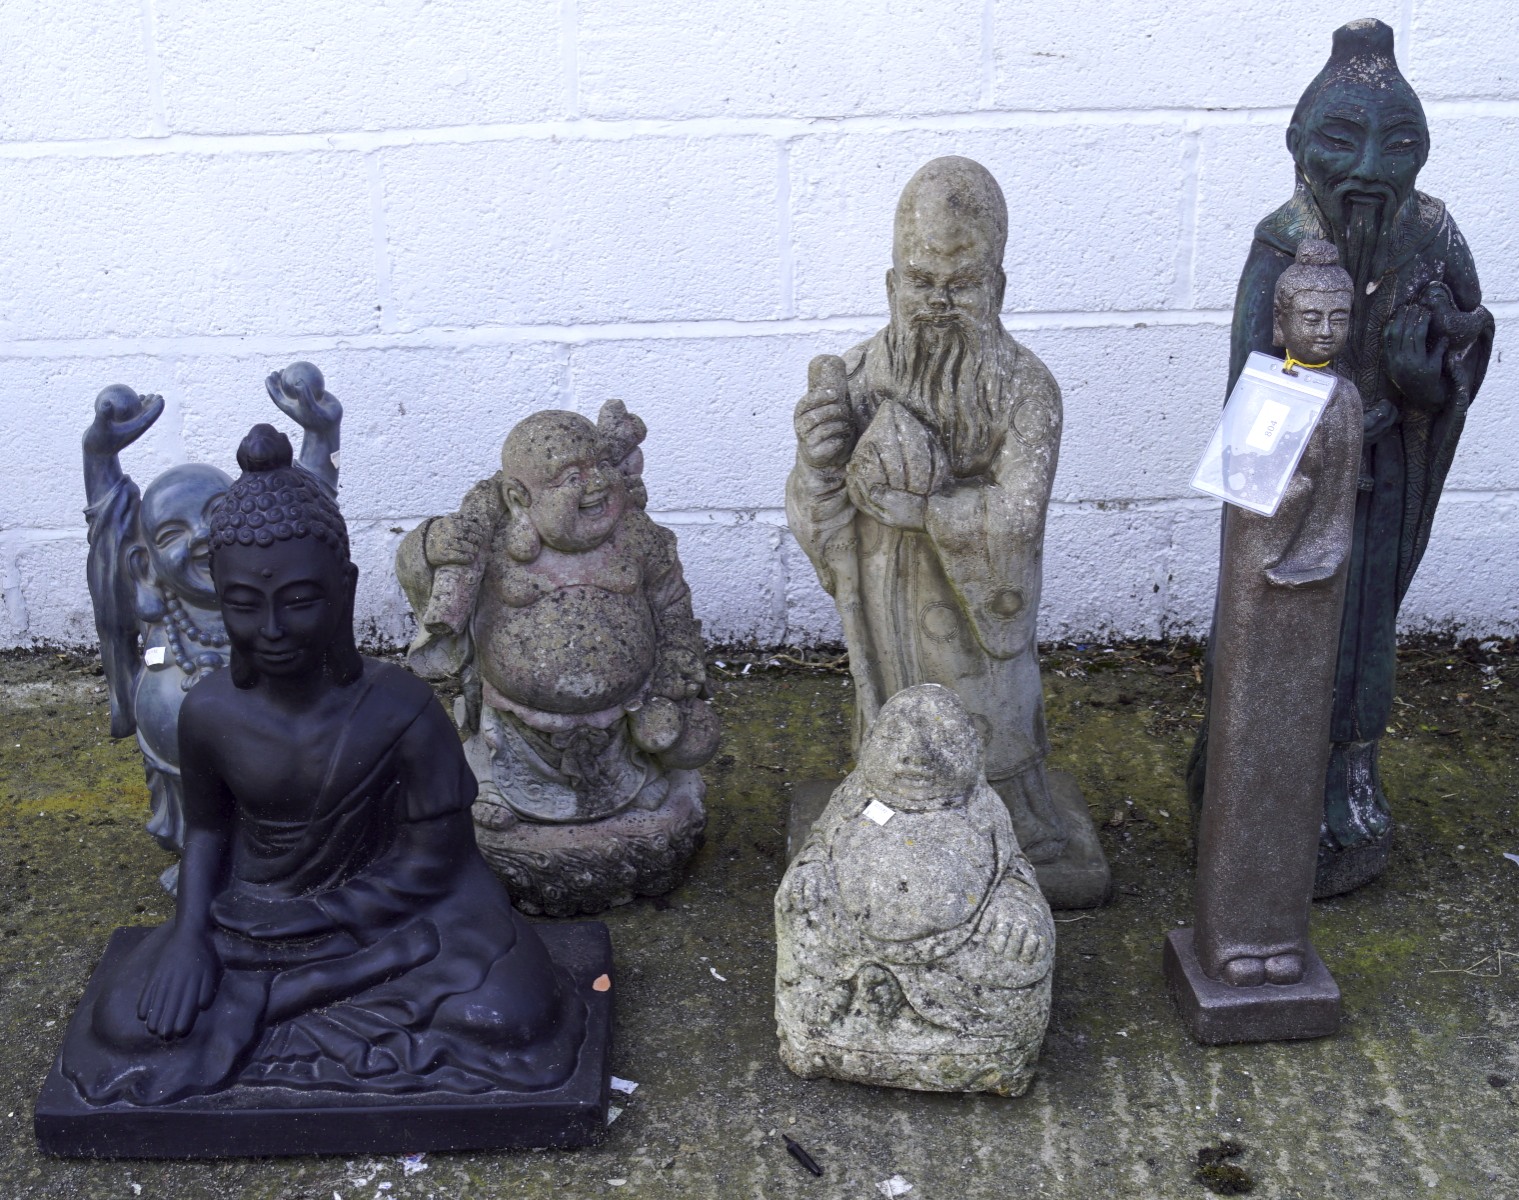 A collection of garden figures, including Buddhas, a Guanyin and immortals,